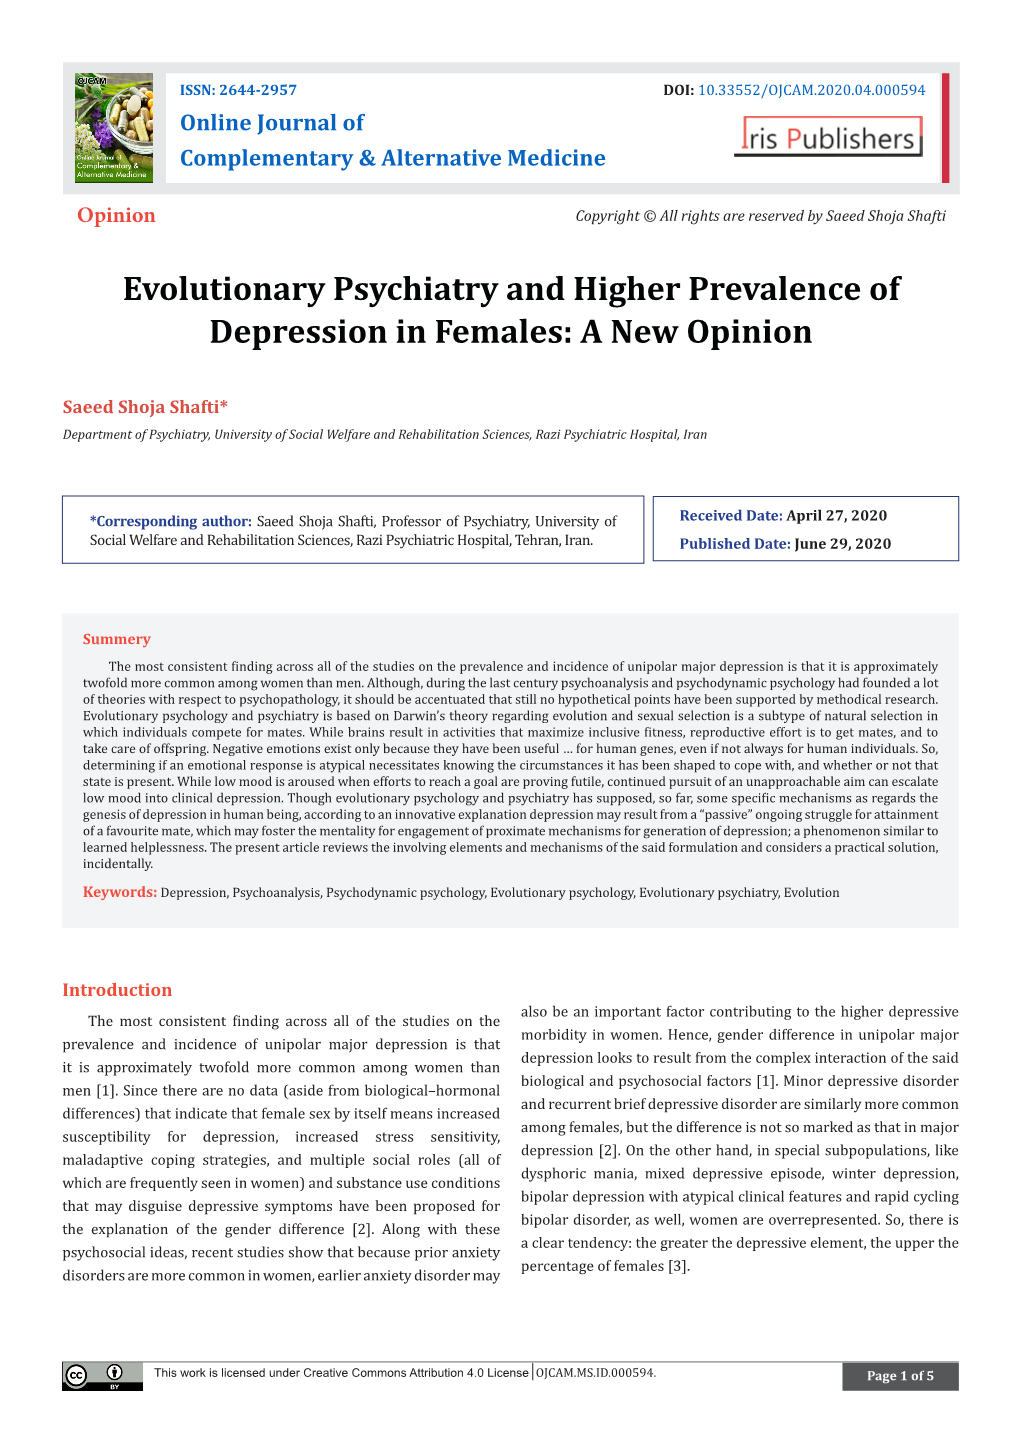 Evolutionary Psychiatry and Higher Prevalence of Depression in Females: a New Opinion